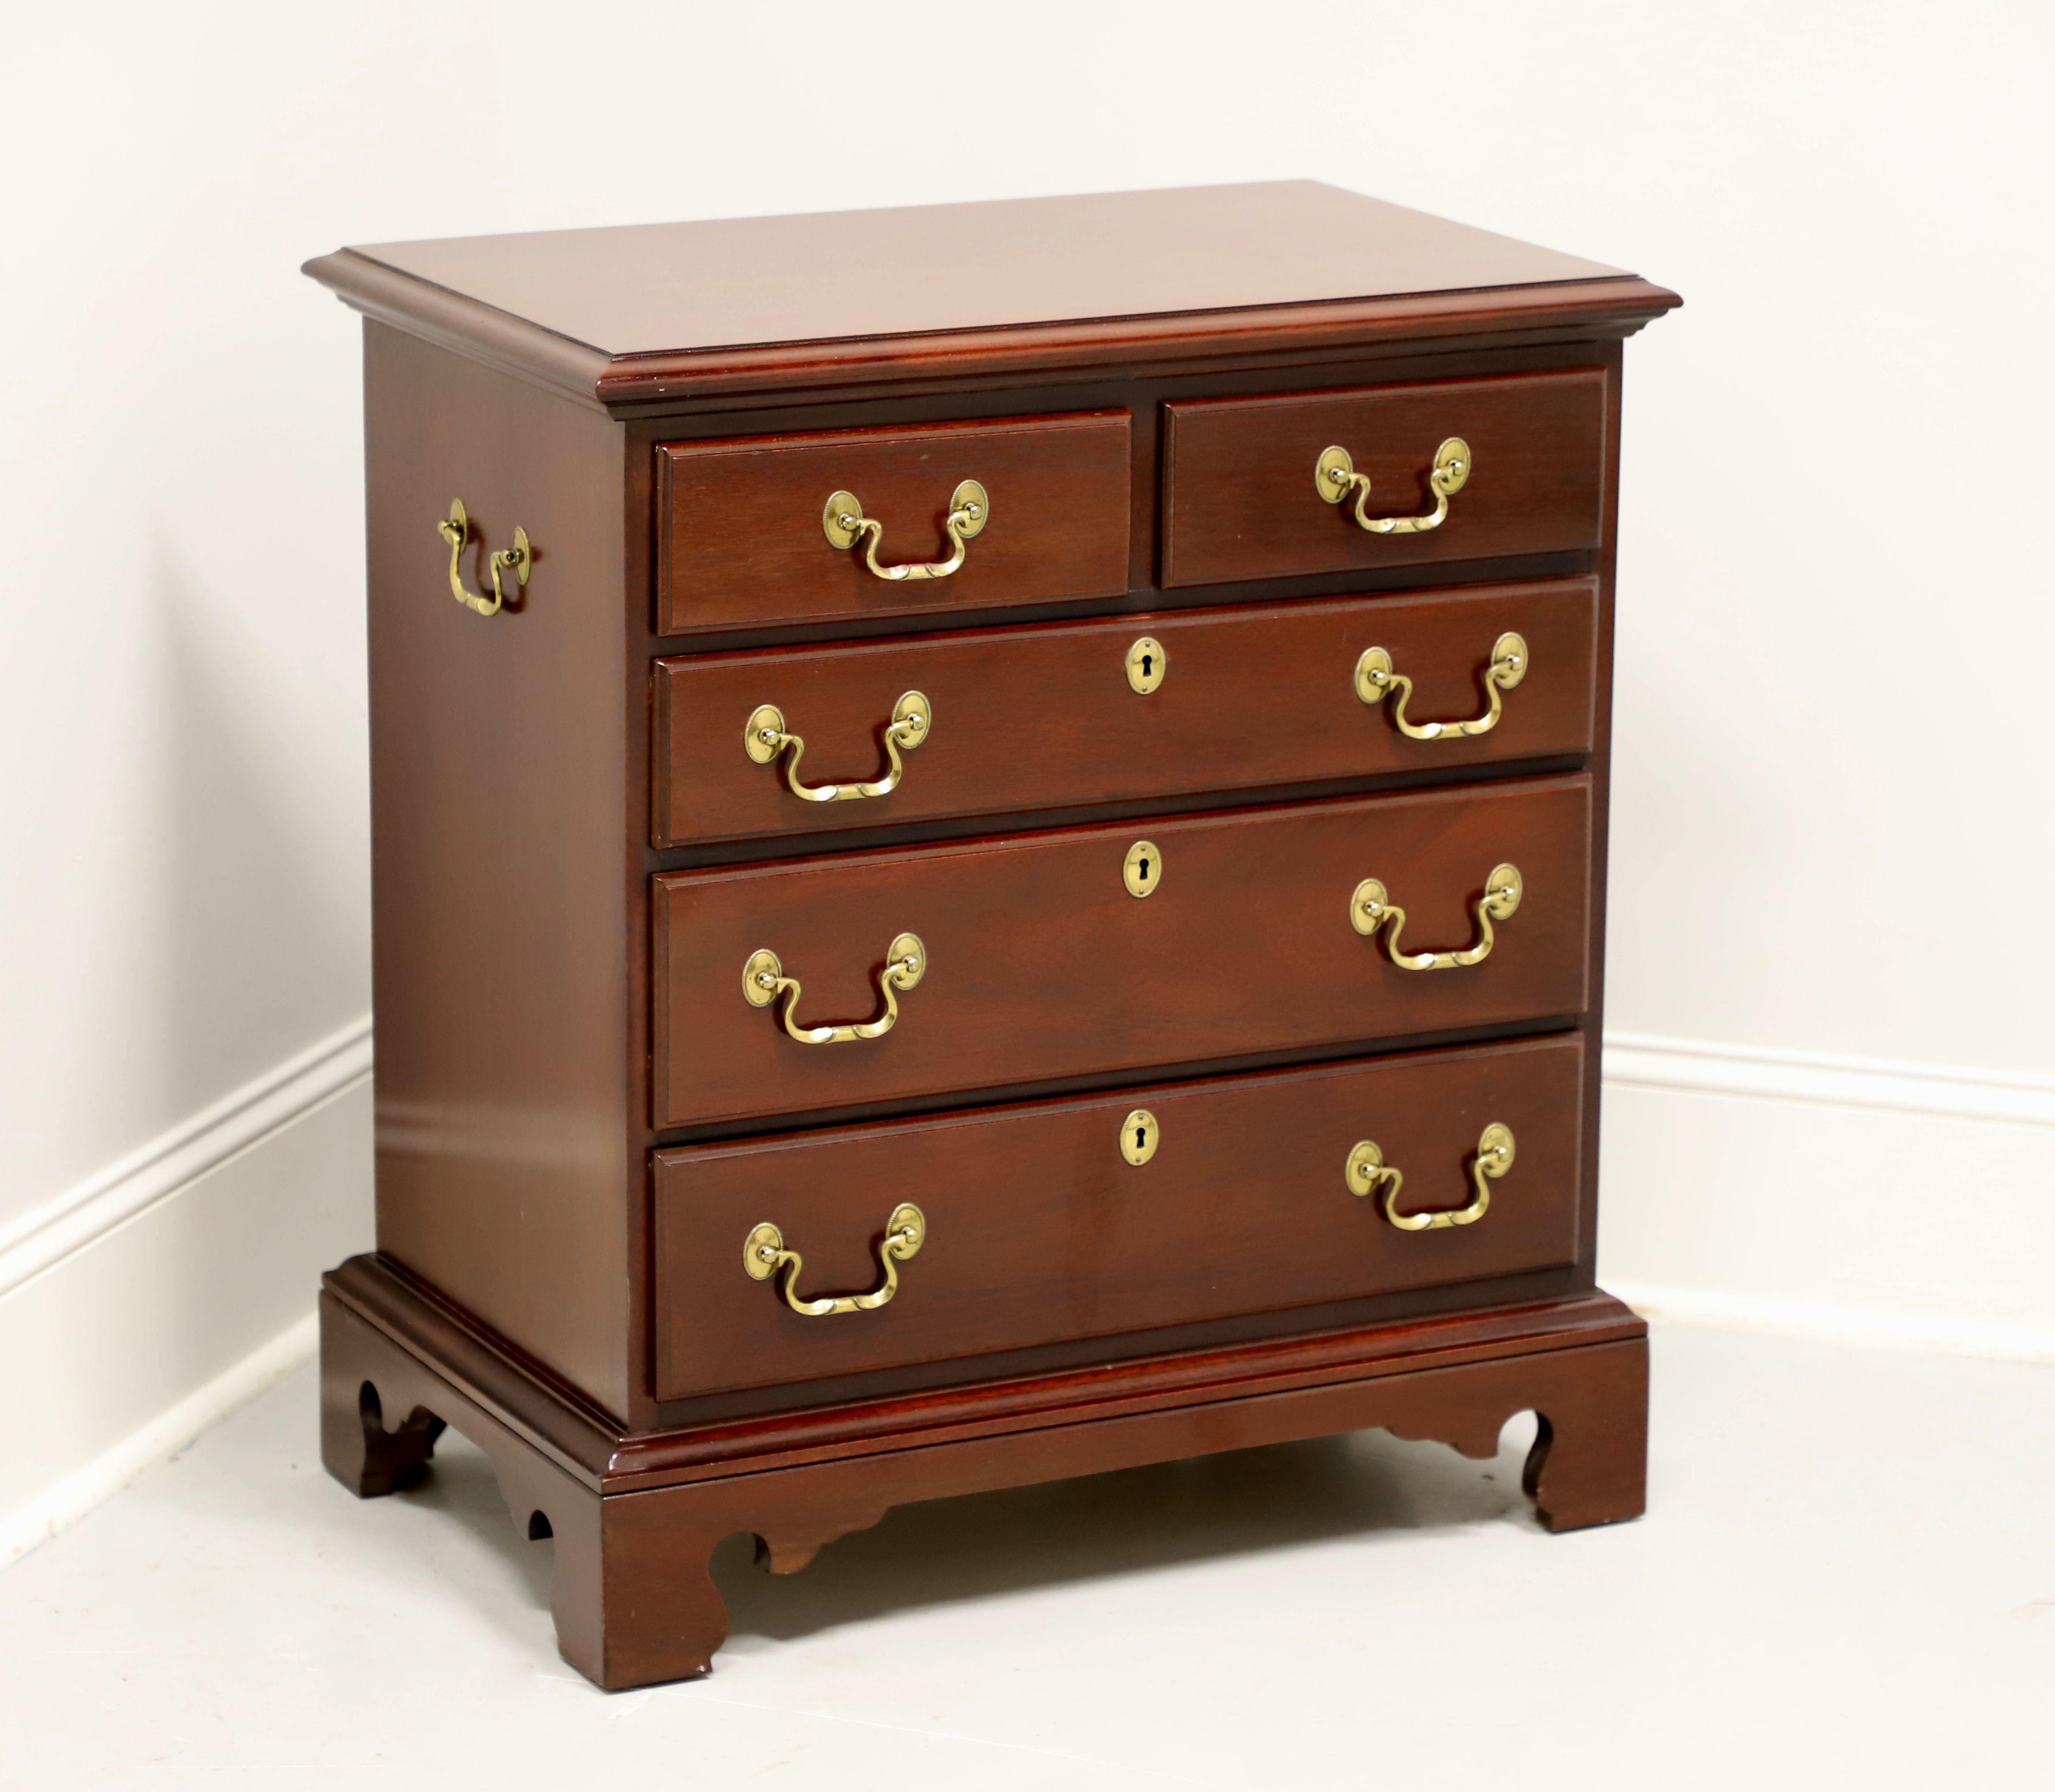 LINK-TAYLOR Heirloom Planters Solid Mahogany Chippendale Bedside Chest - B 4